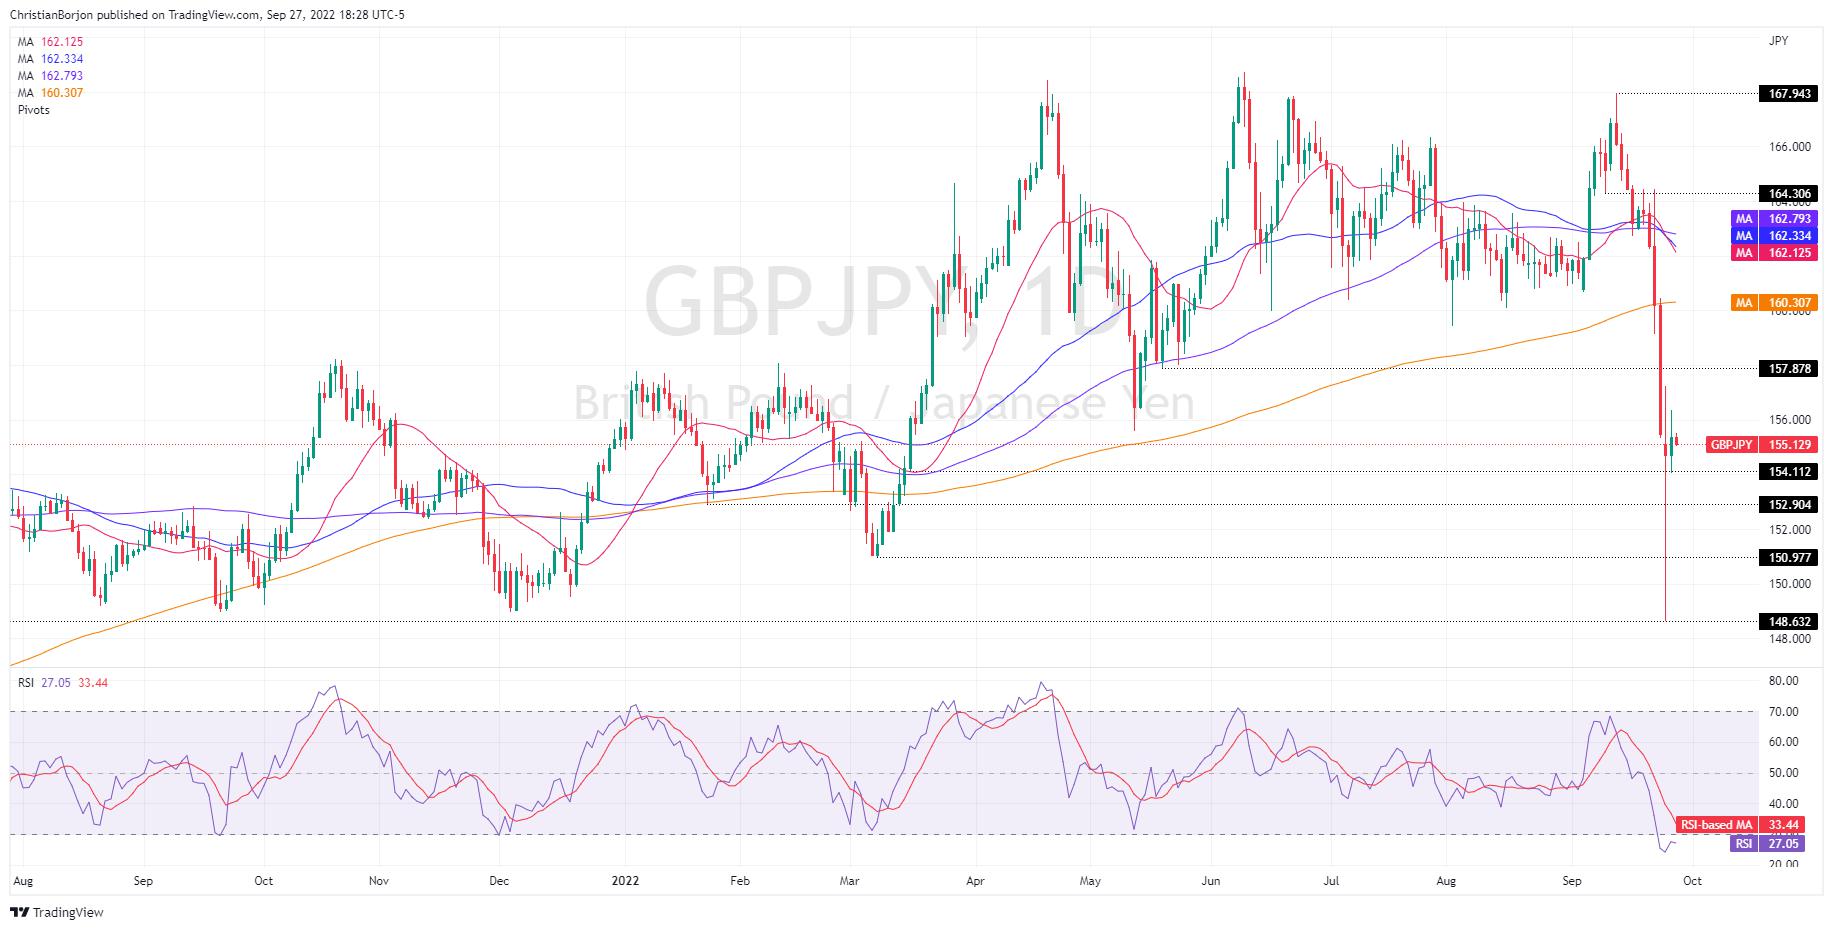 GBP/JPY Price Analysis: Fluctuates around 155.00 as a bullish harami form, targeting the 200-DMA